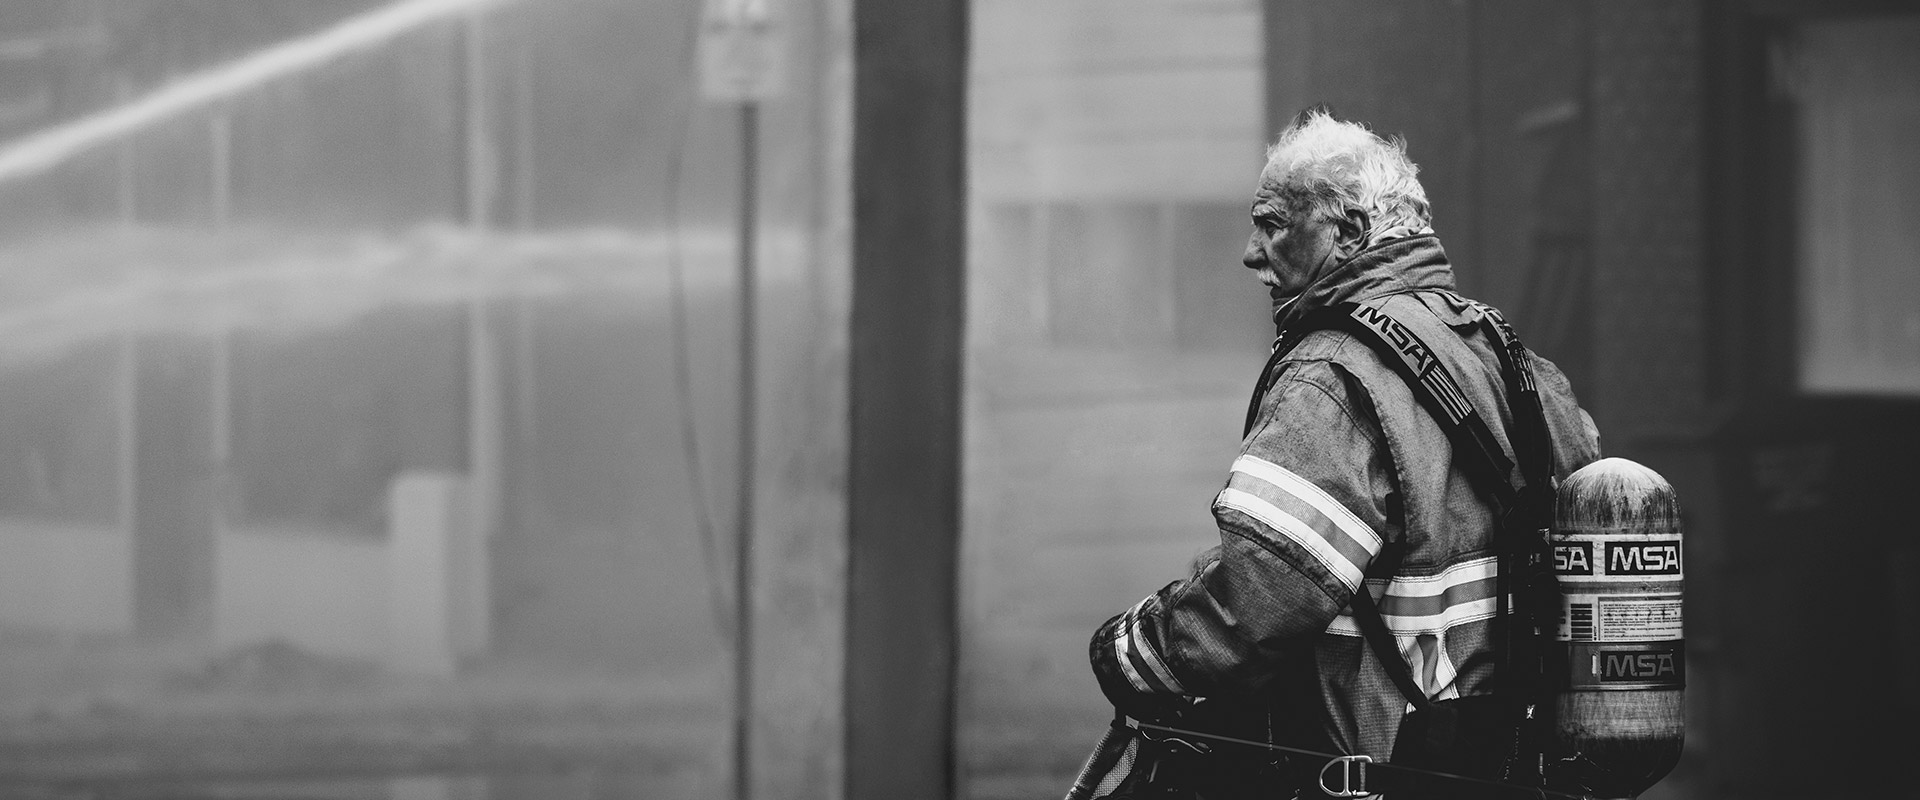 Firefighter Old Bw 1920X800